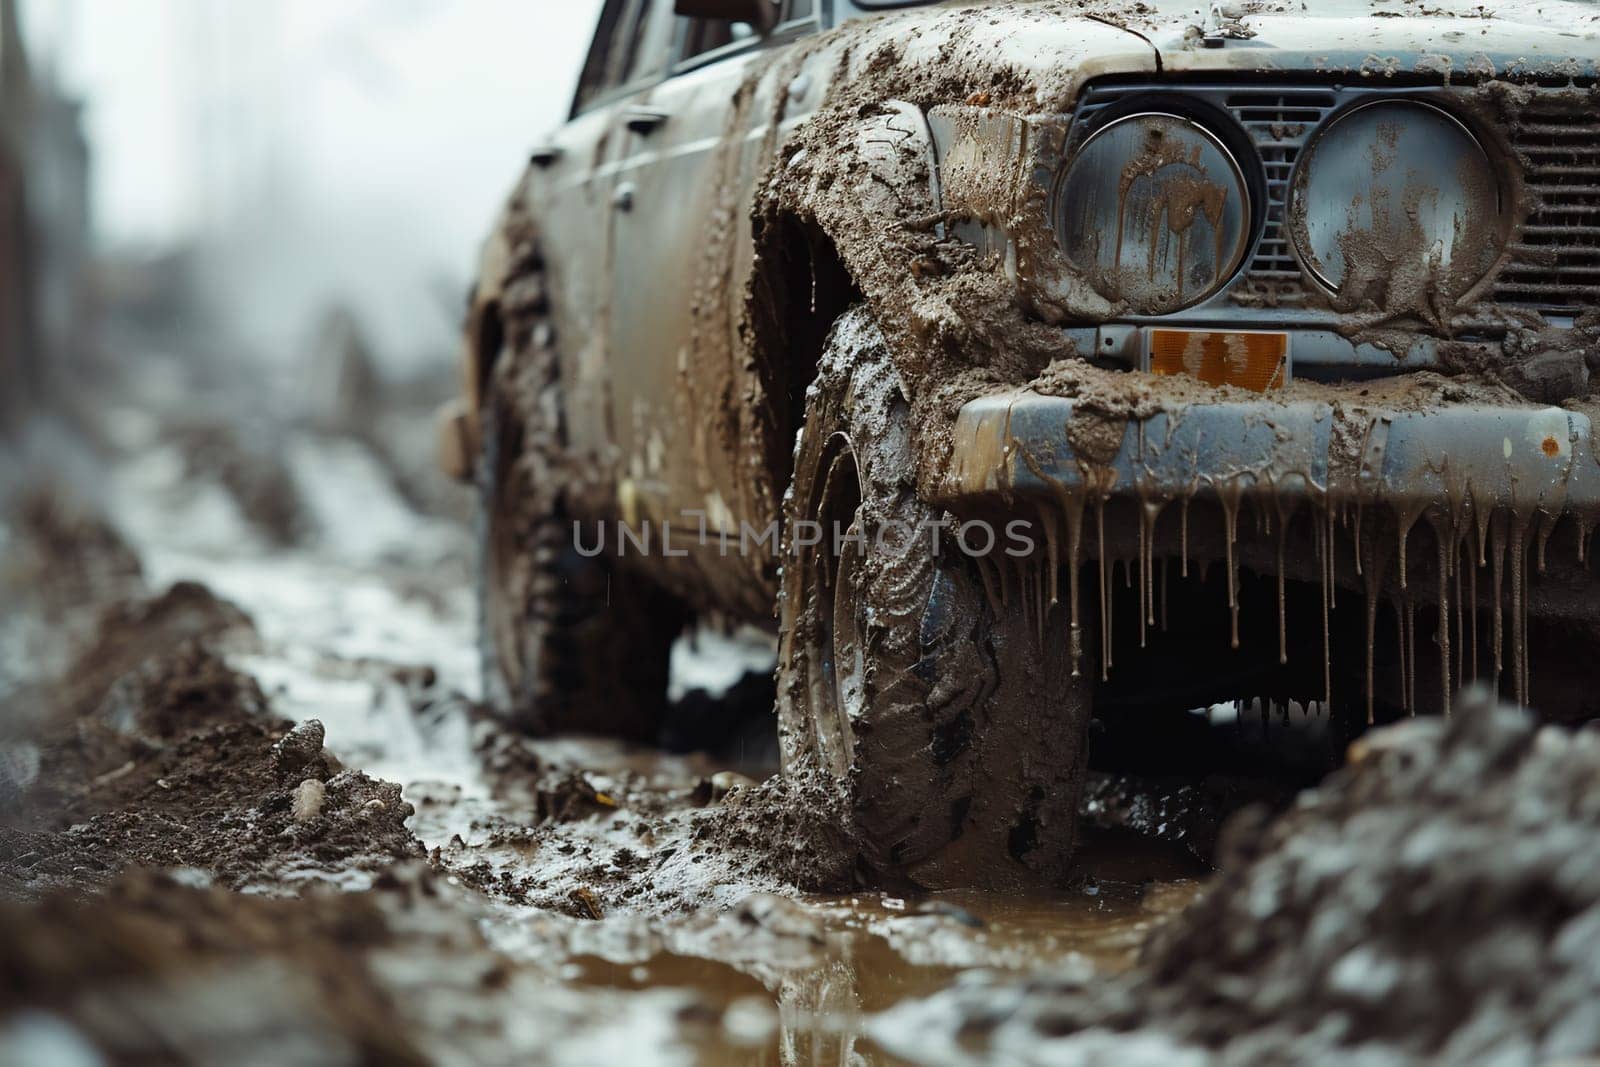 SUV wheel stalled in mud and water. by Andelov13